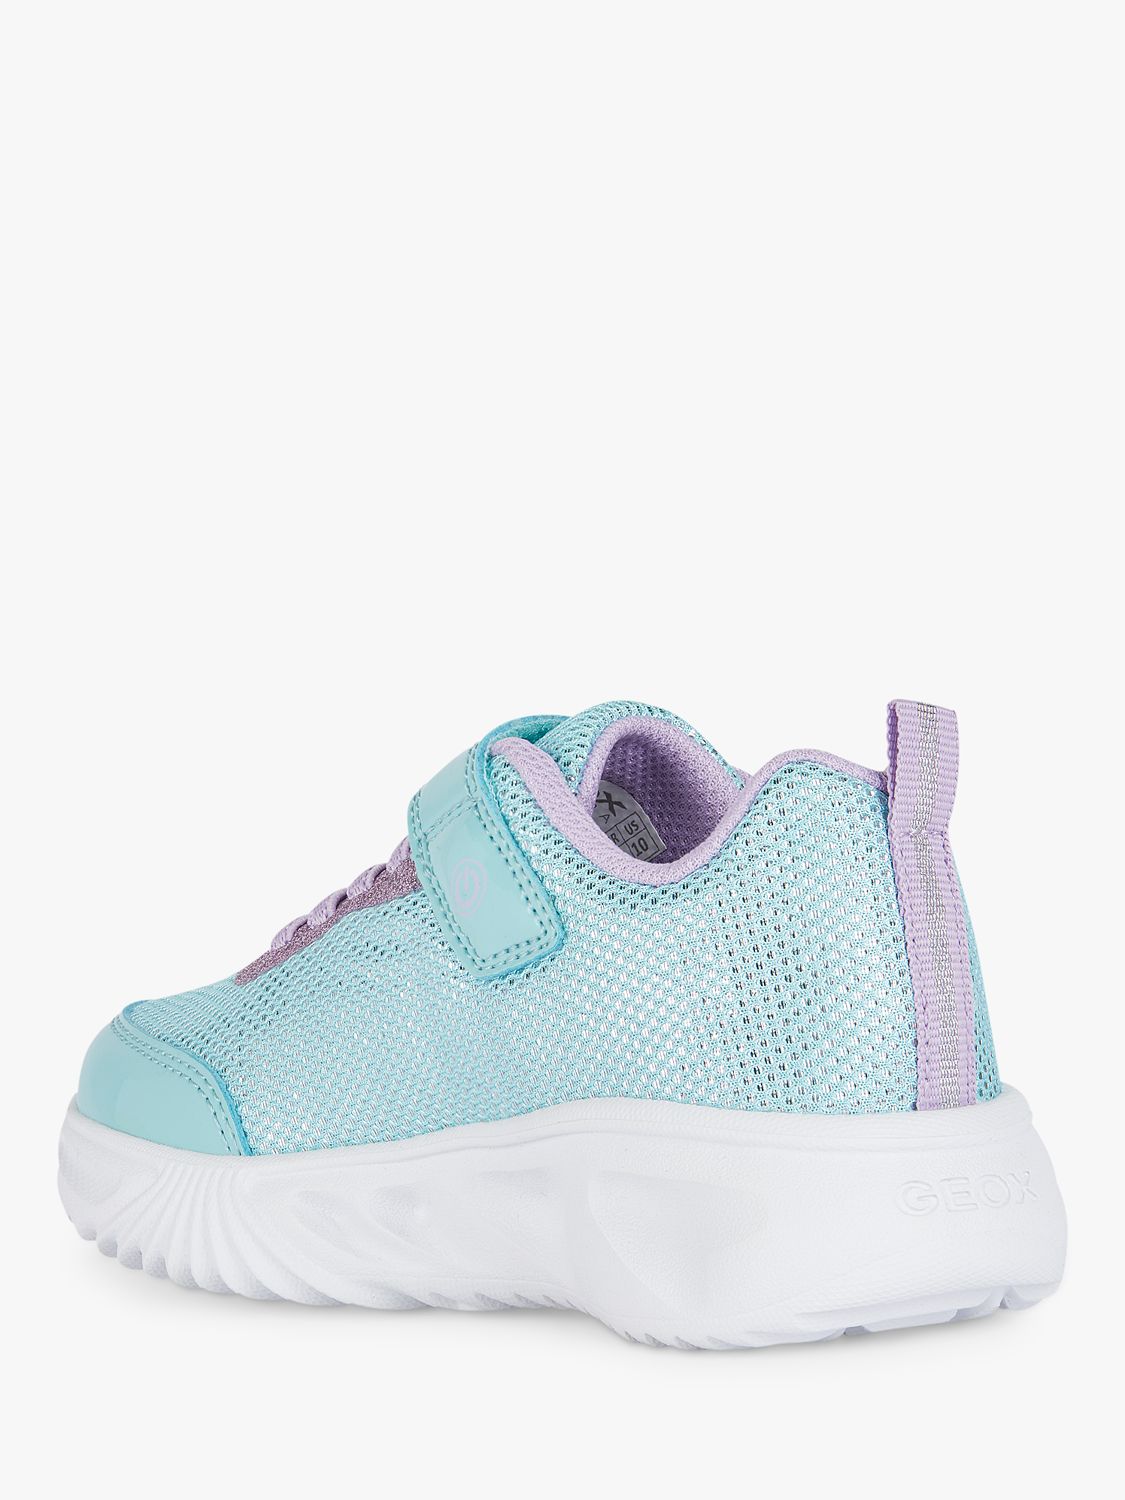 Buy Geox Kids' Assister Light Up Trainers Online at johnlewis.com